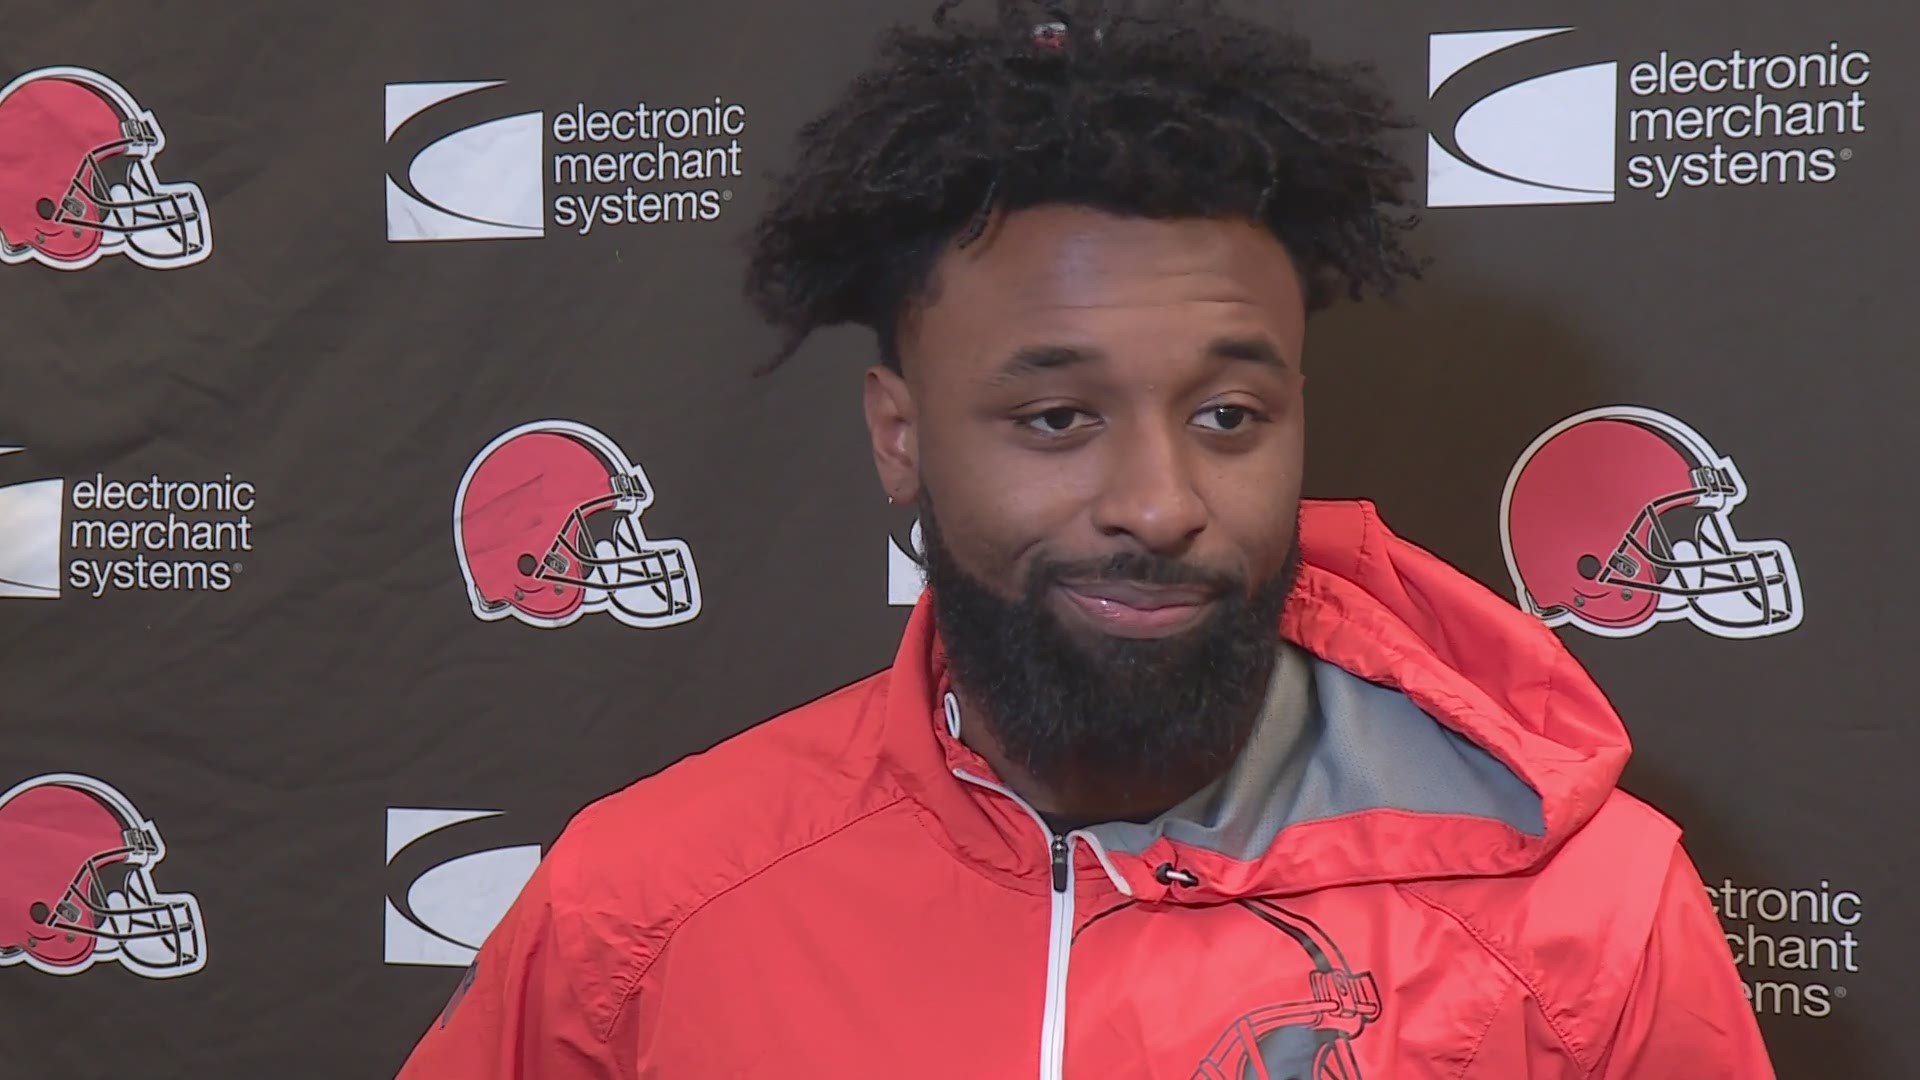 Browns receiver Jarvis Landry denied a report from the NFL Network that he said "come get me" to the Cardinals sideline during the Browns' loss on Sunday.